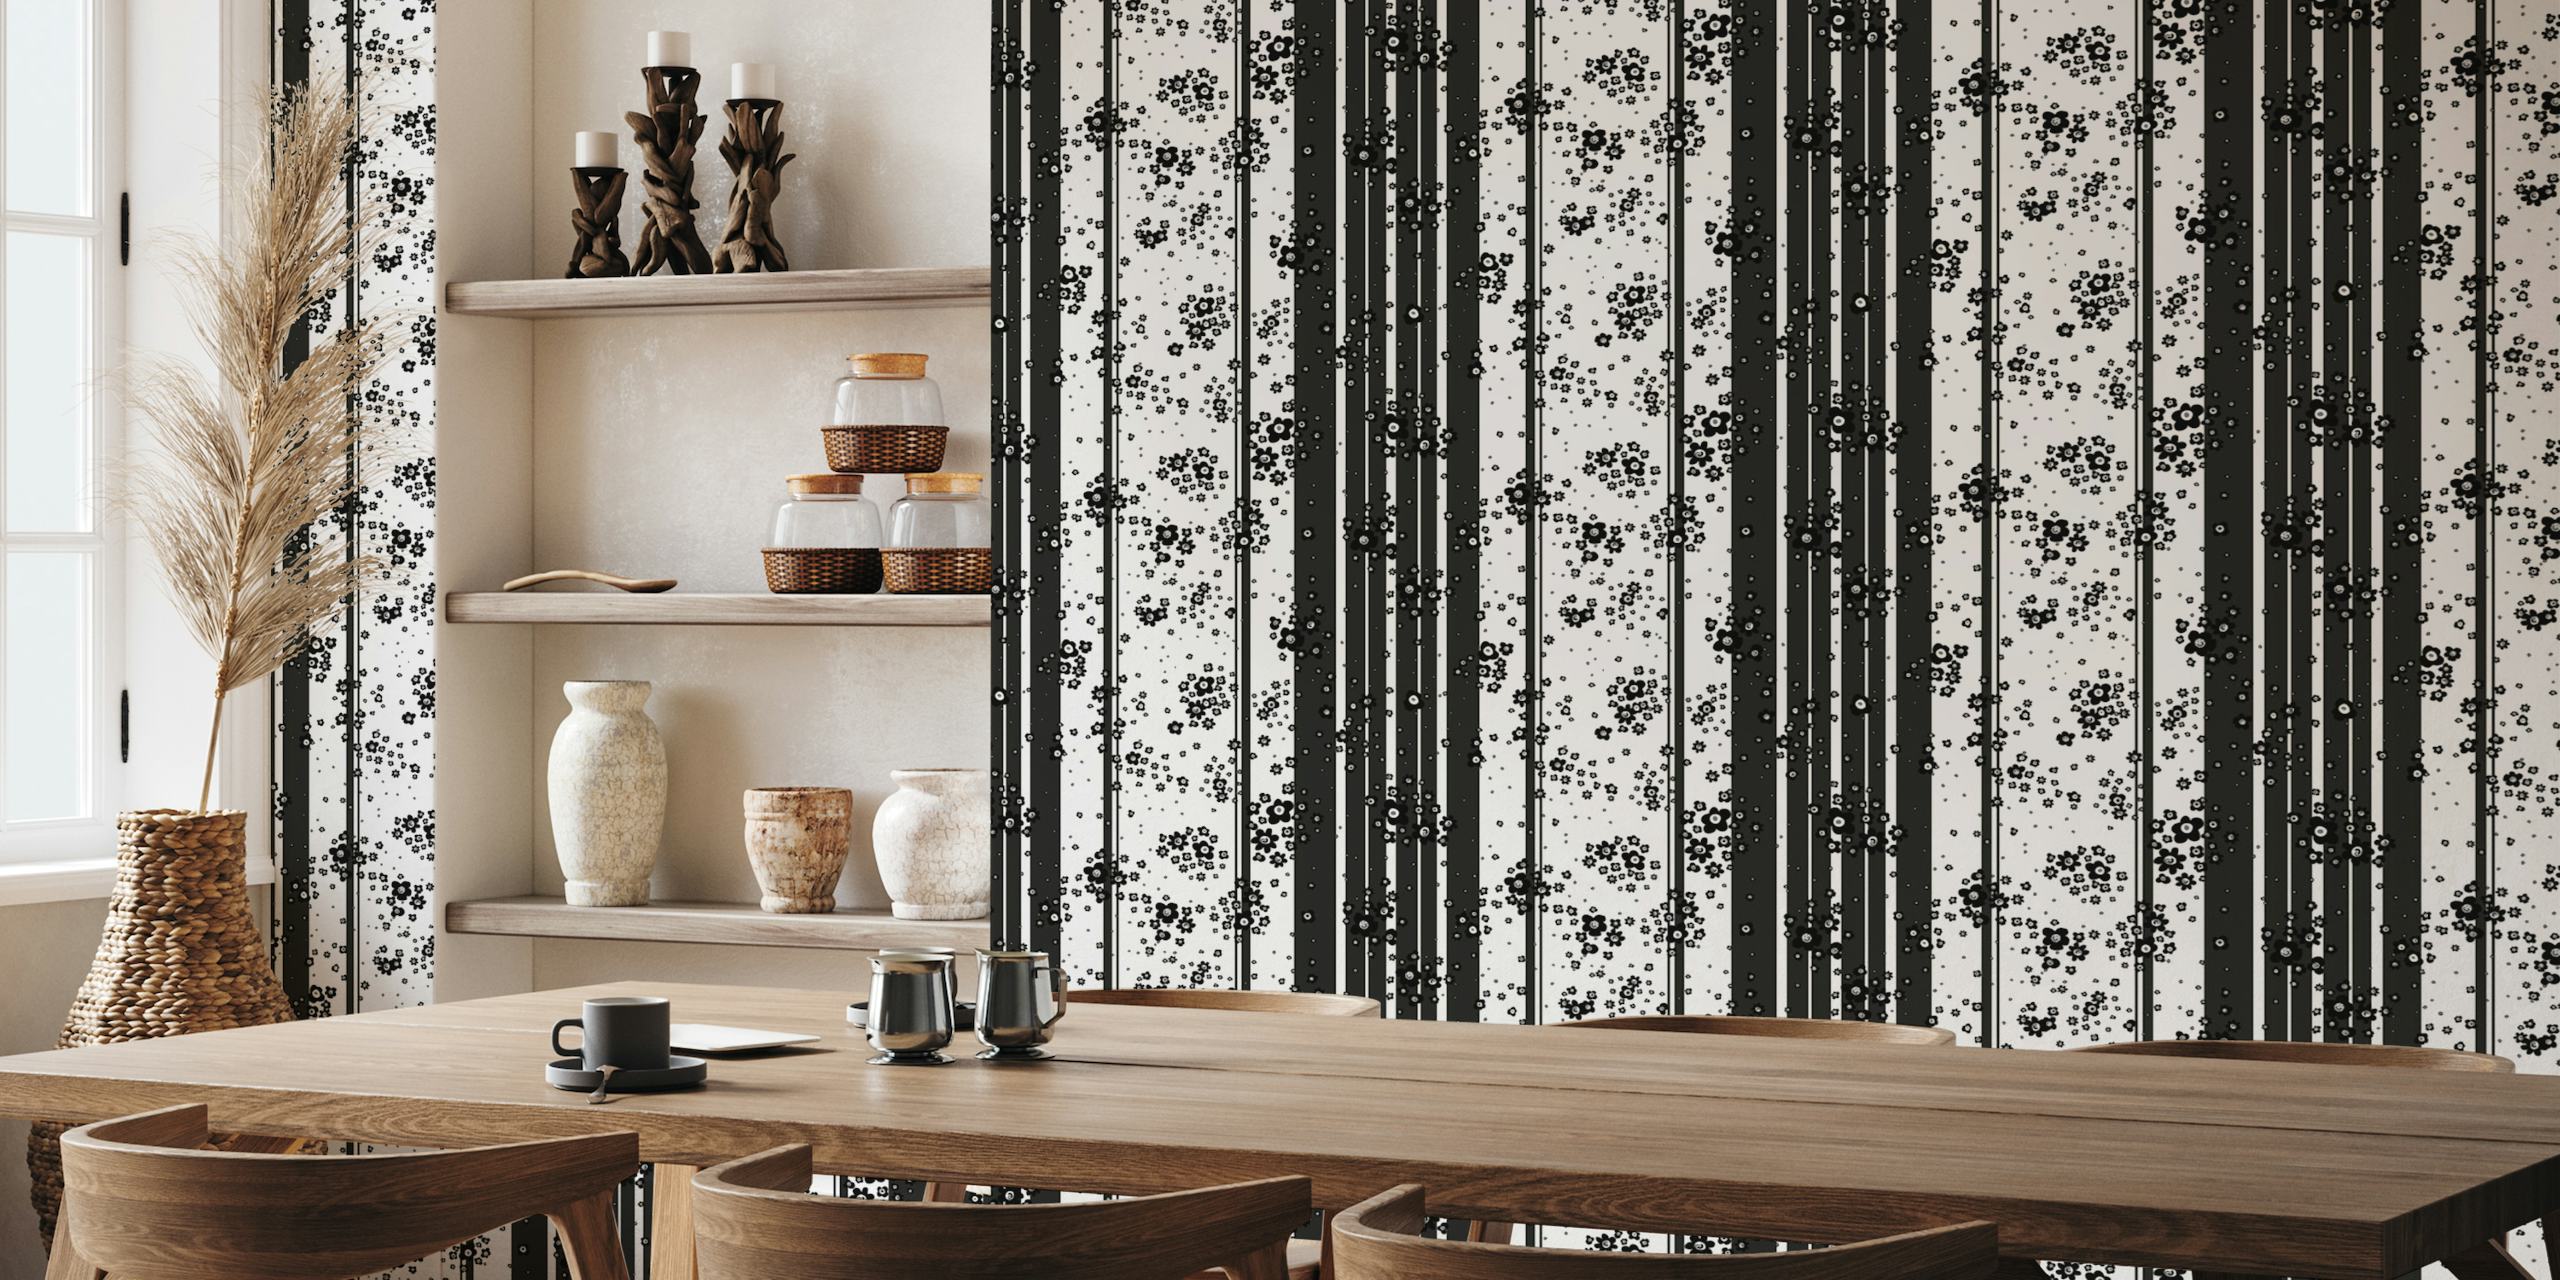 Black and white striped wall mural with floral ditsy pattern